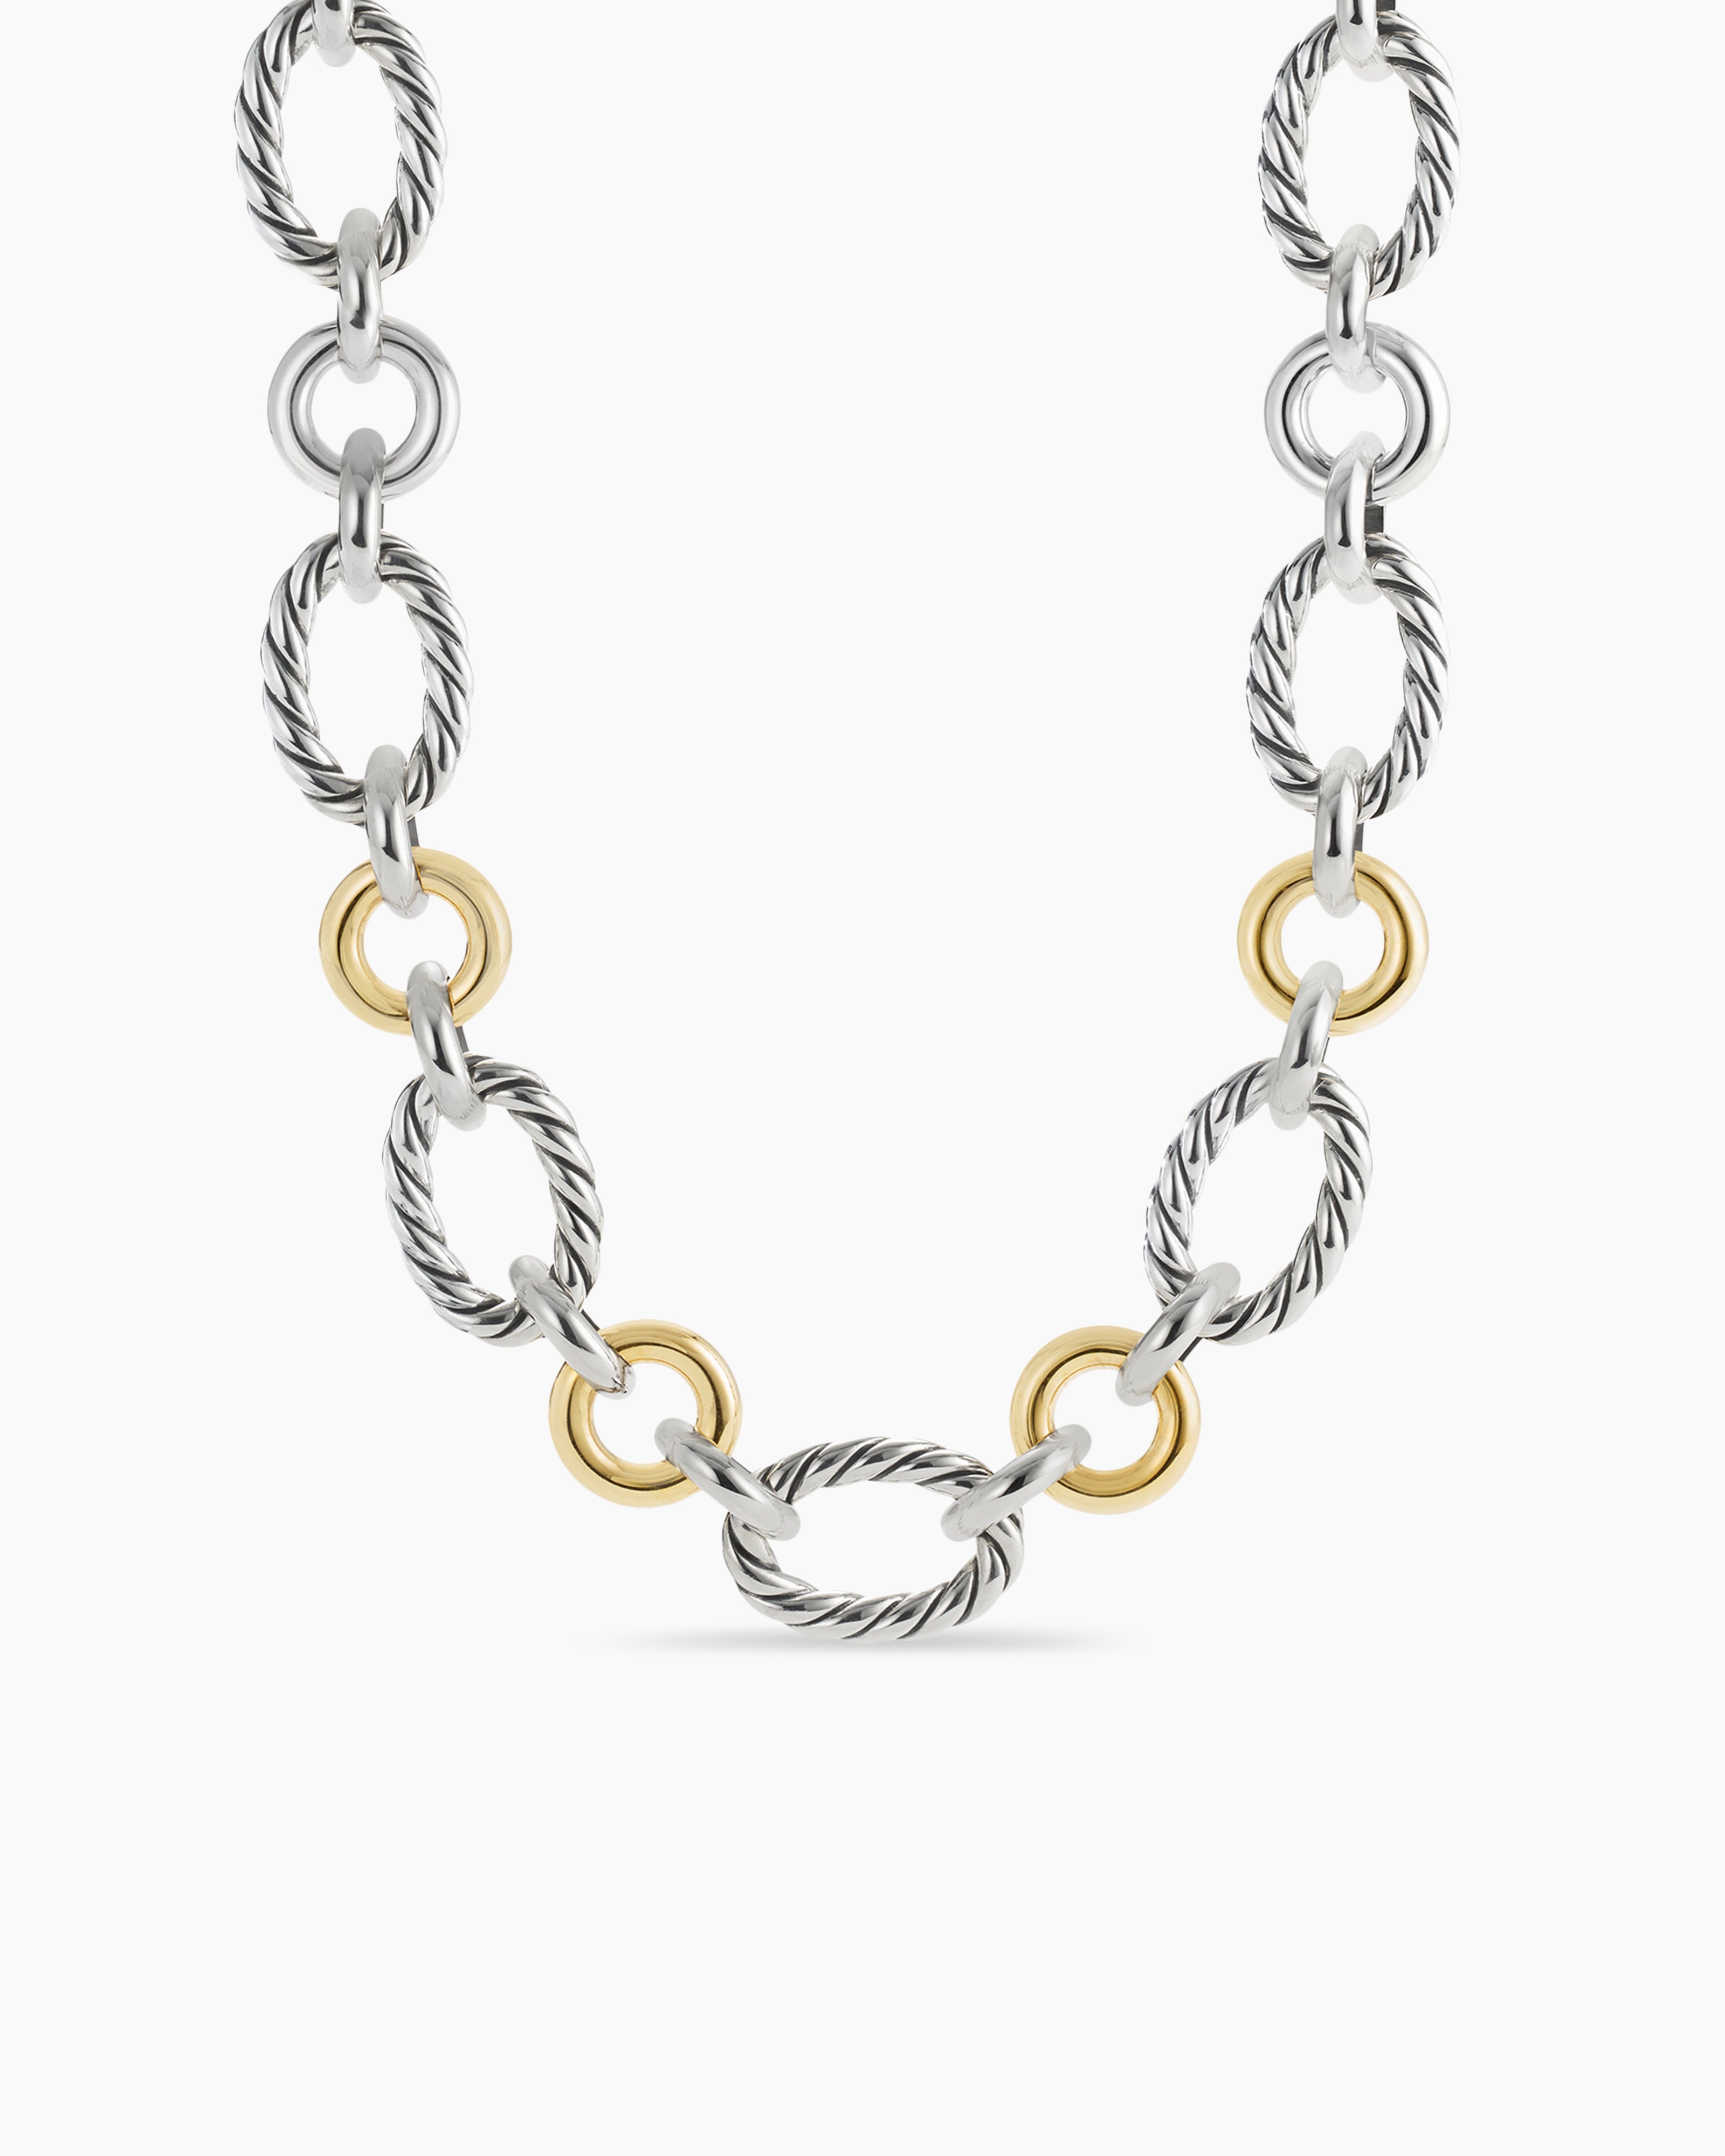 David Yurman Cable Amulet Box Chain Slider Necklace in Sterling Silver with 18K Yellow Gold